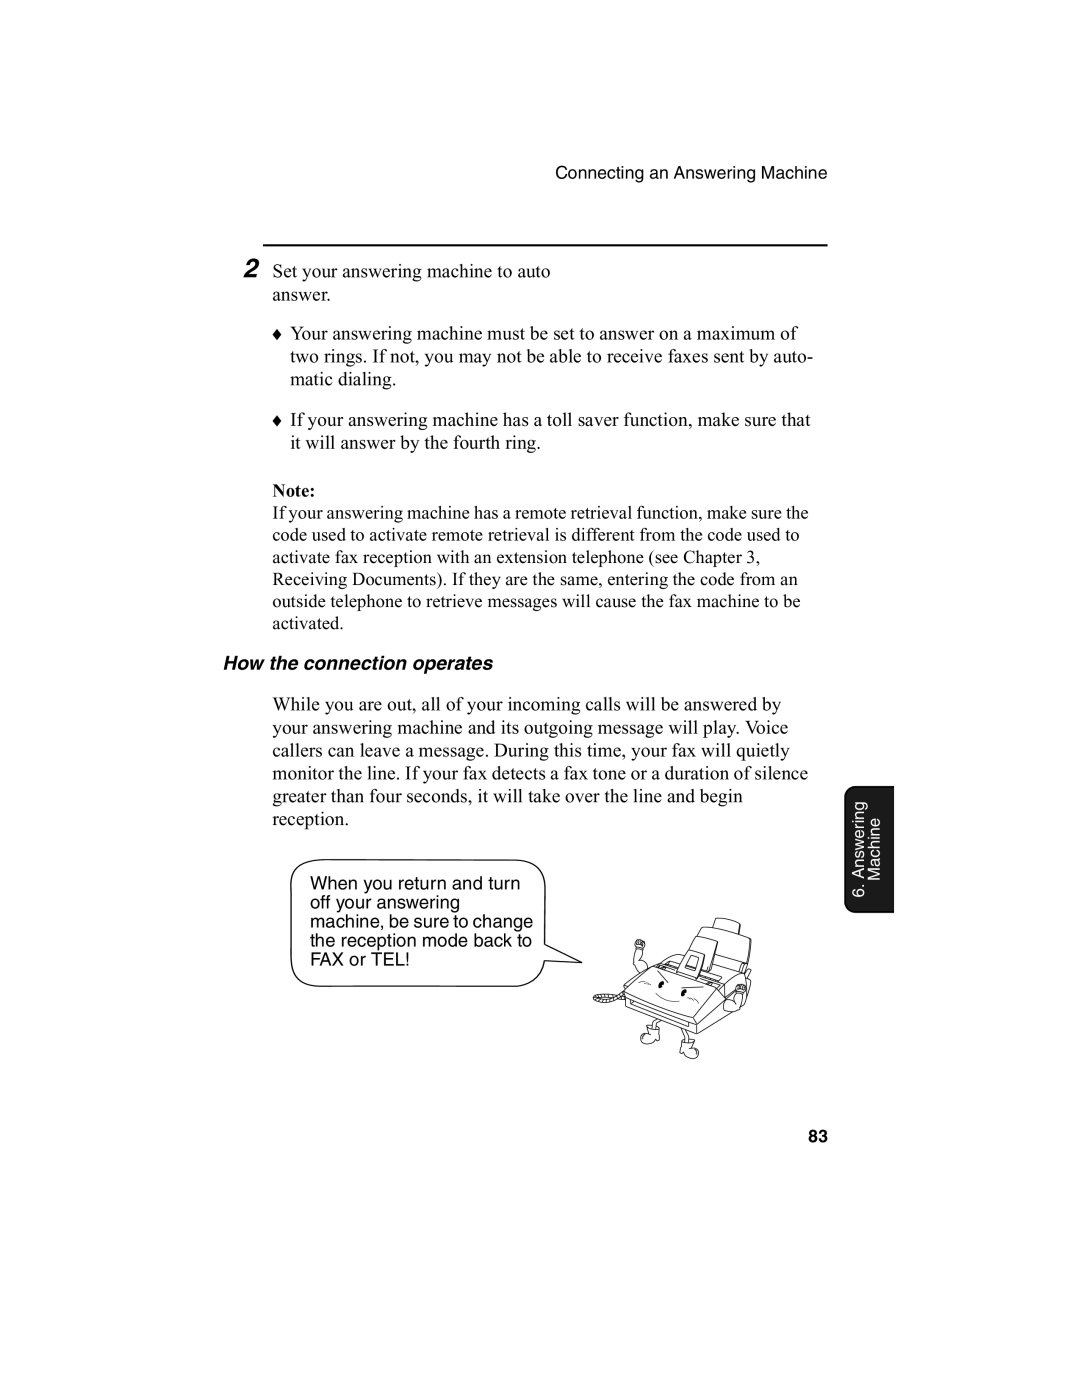 Sharp FO-2970M operation manual How the connection operates 